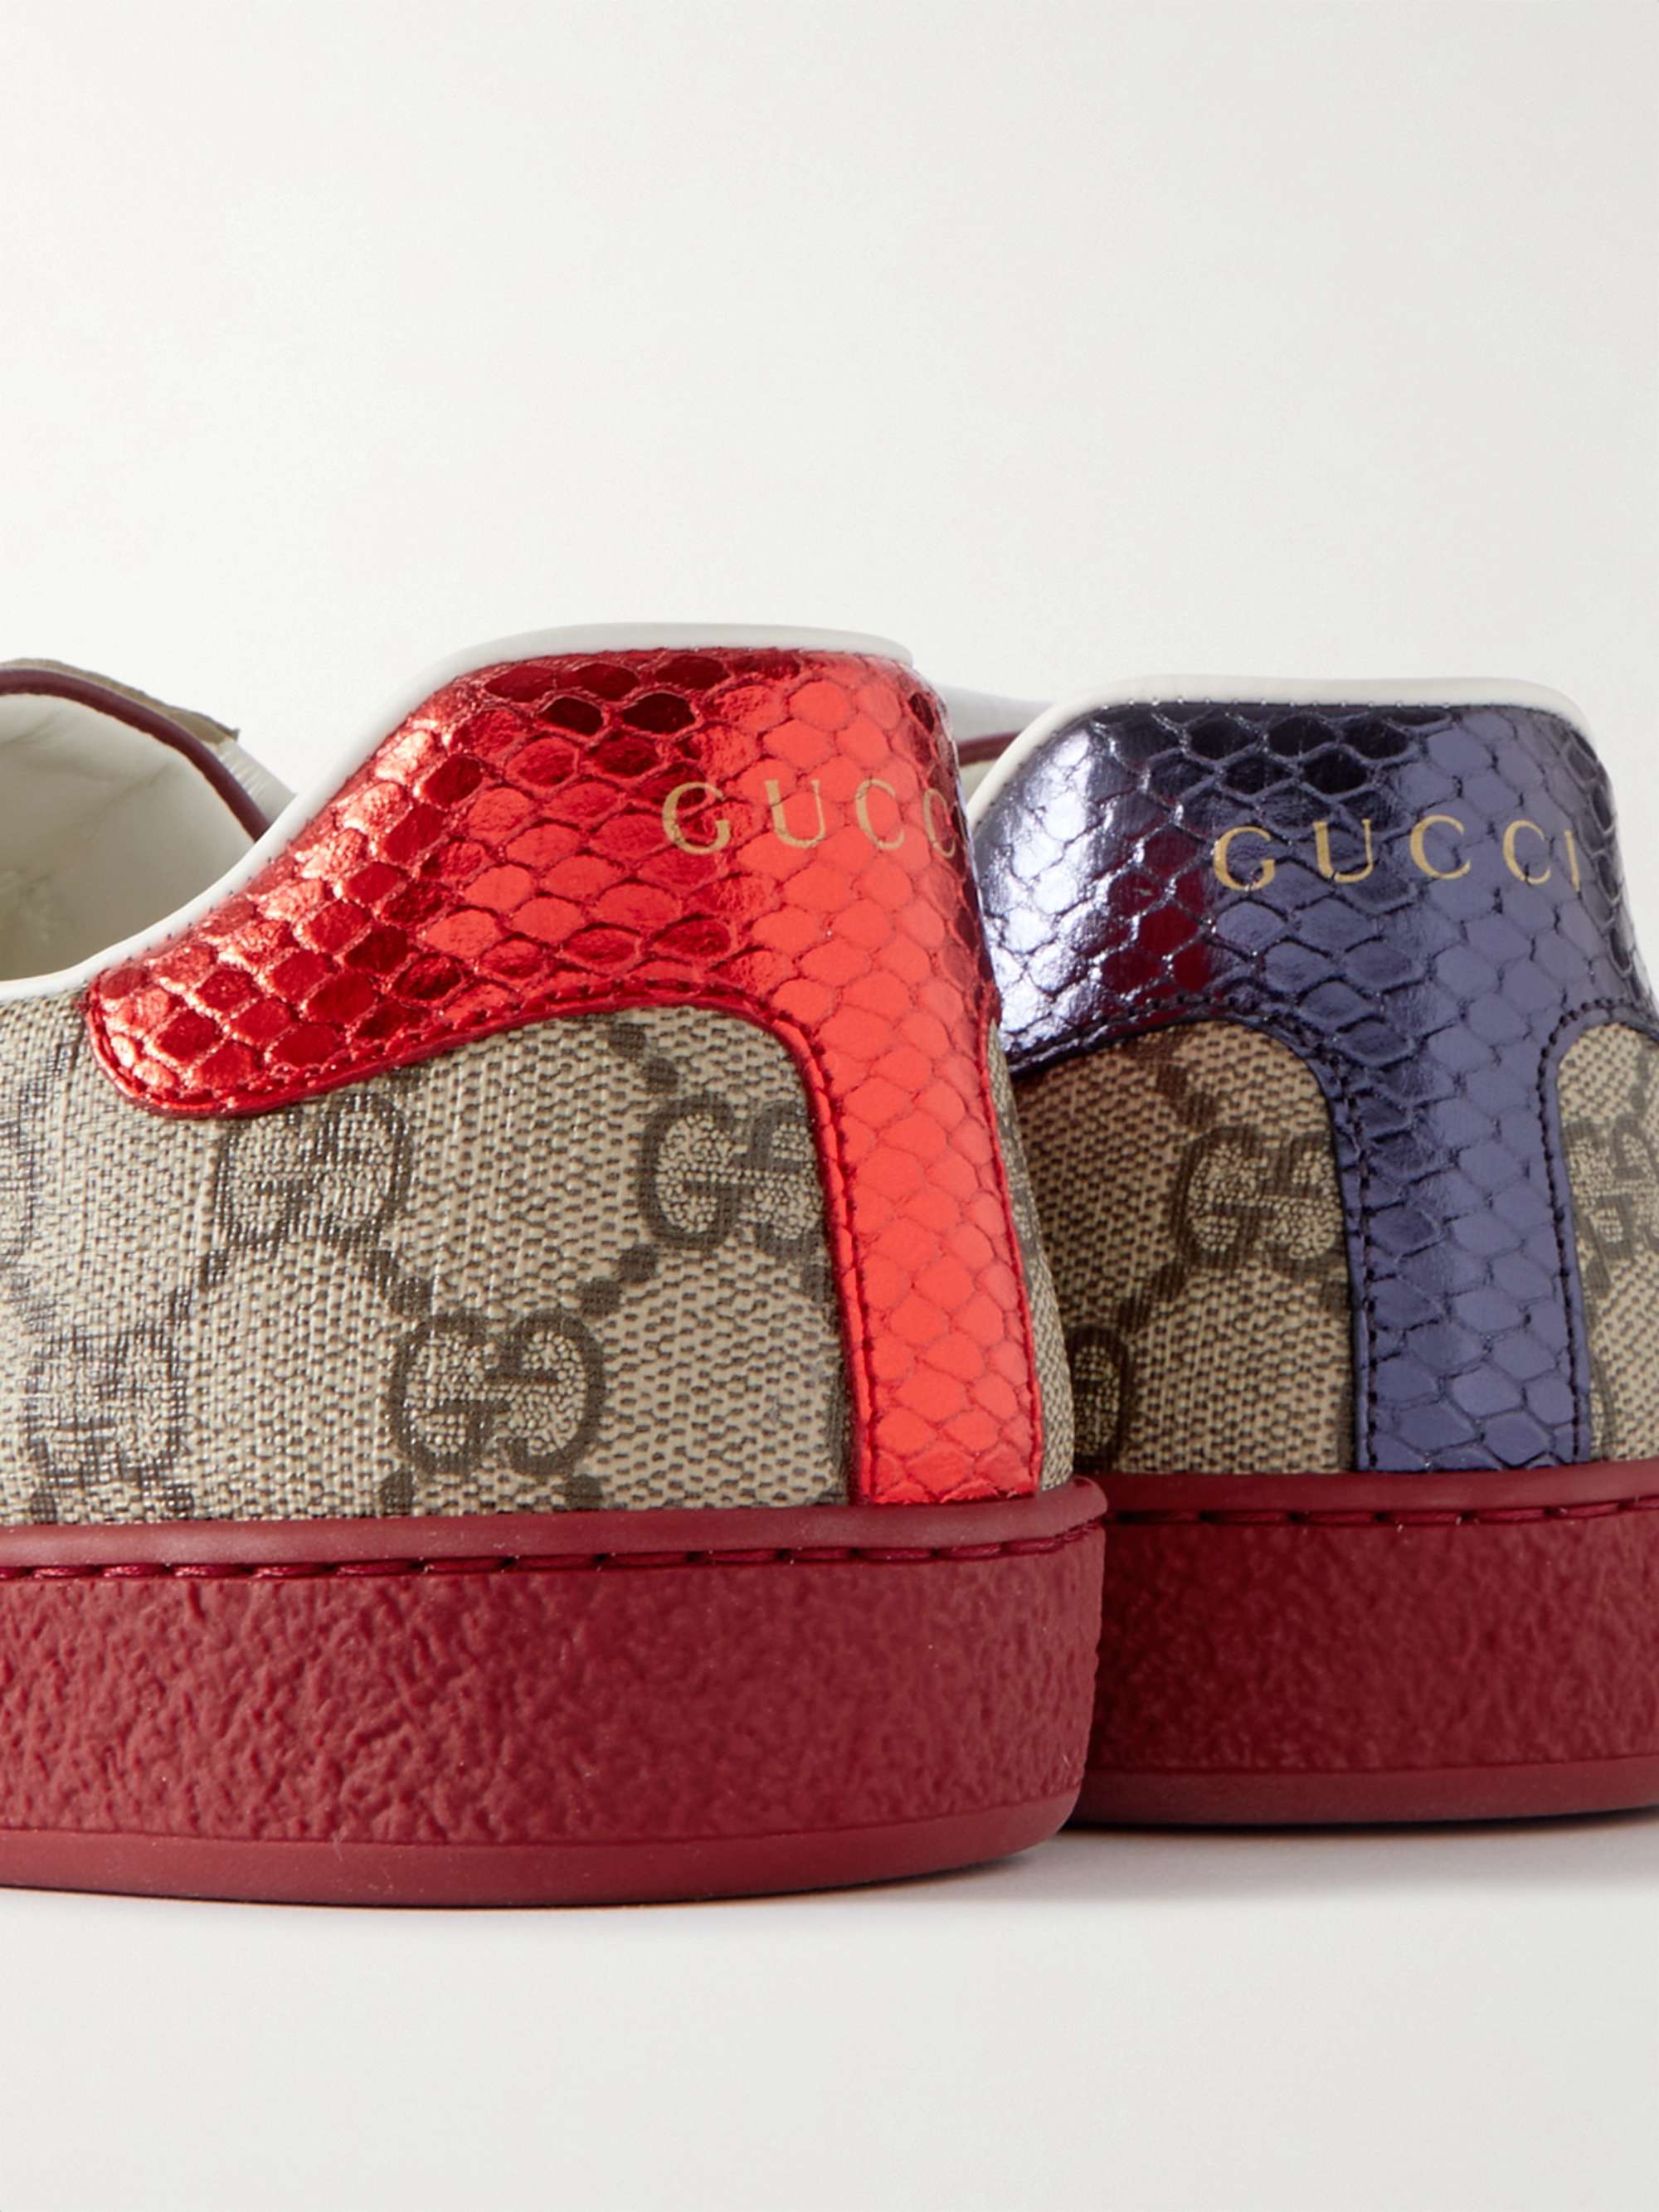 GUCCI Ace Webbing-Trimmed Monogrammed Coated-Canvas Sneakers